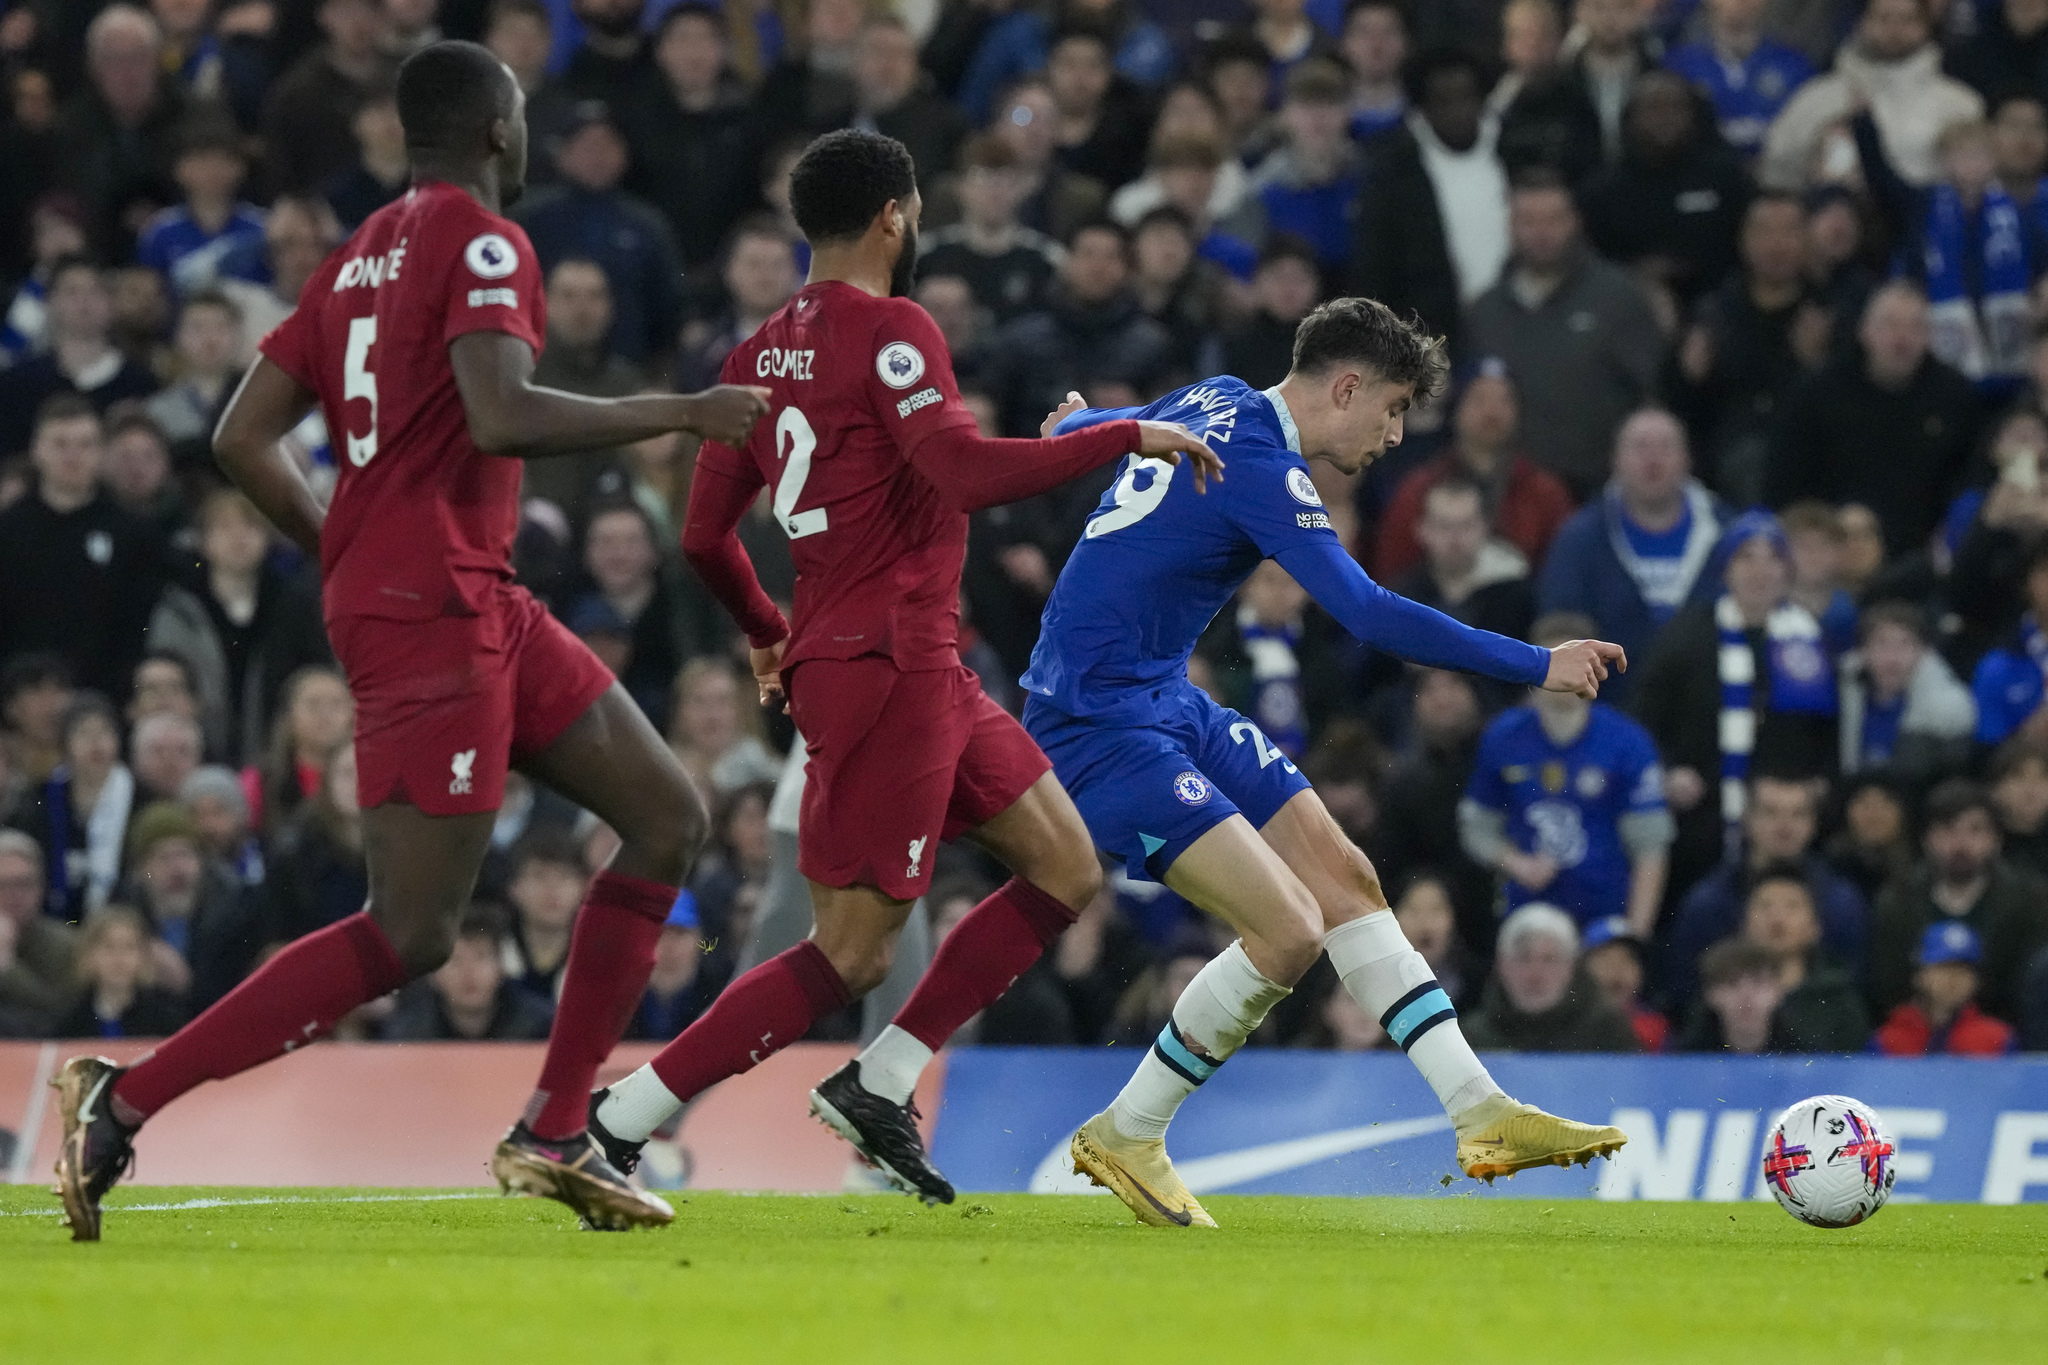  lt;HIT gt;Chelsea lt;/HIT gt;'s Kai Havertz, right, kicks the ball during the English Premier League soccer match between  lt;HIT gt;Chelsea lt;/HIT gt; and Liverpool at Stamford Bridge stadium in London, Tuesday, April 4, 2023. (AP Photo/Frank Augstein)